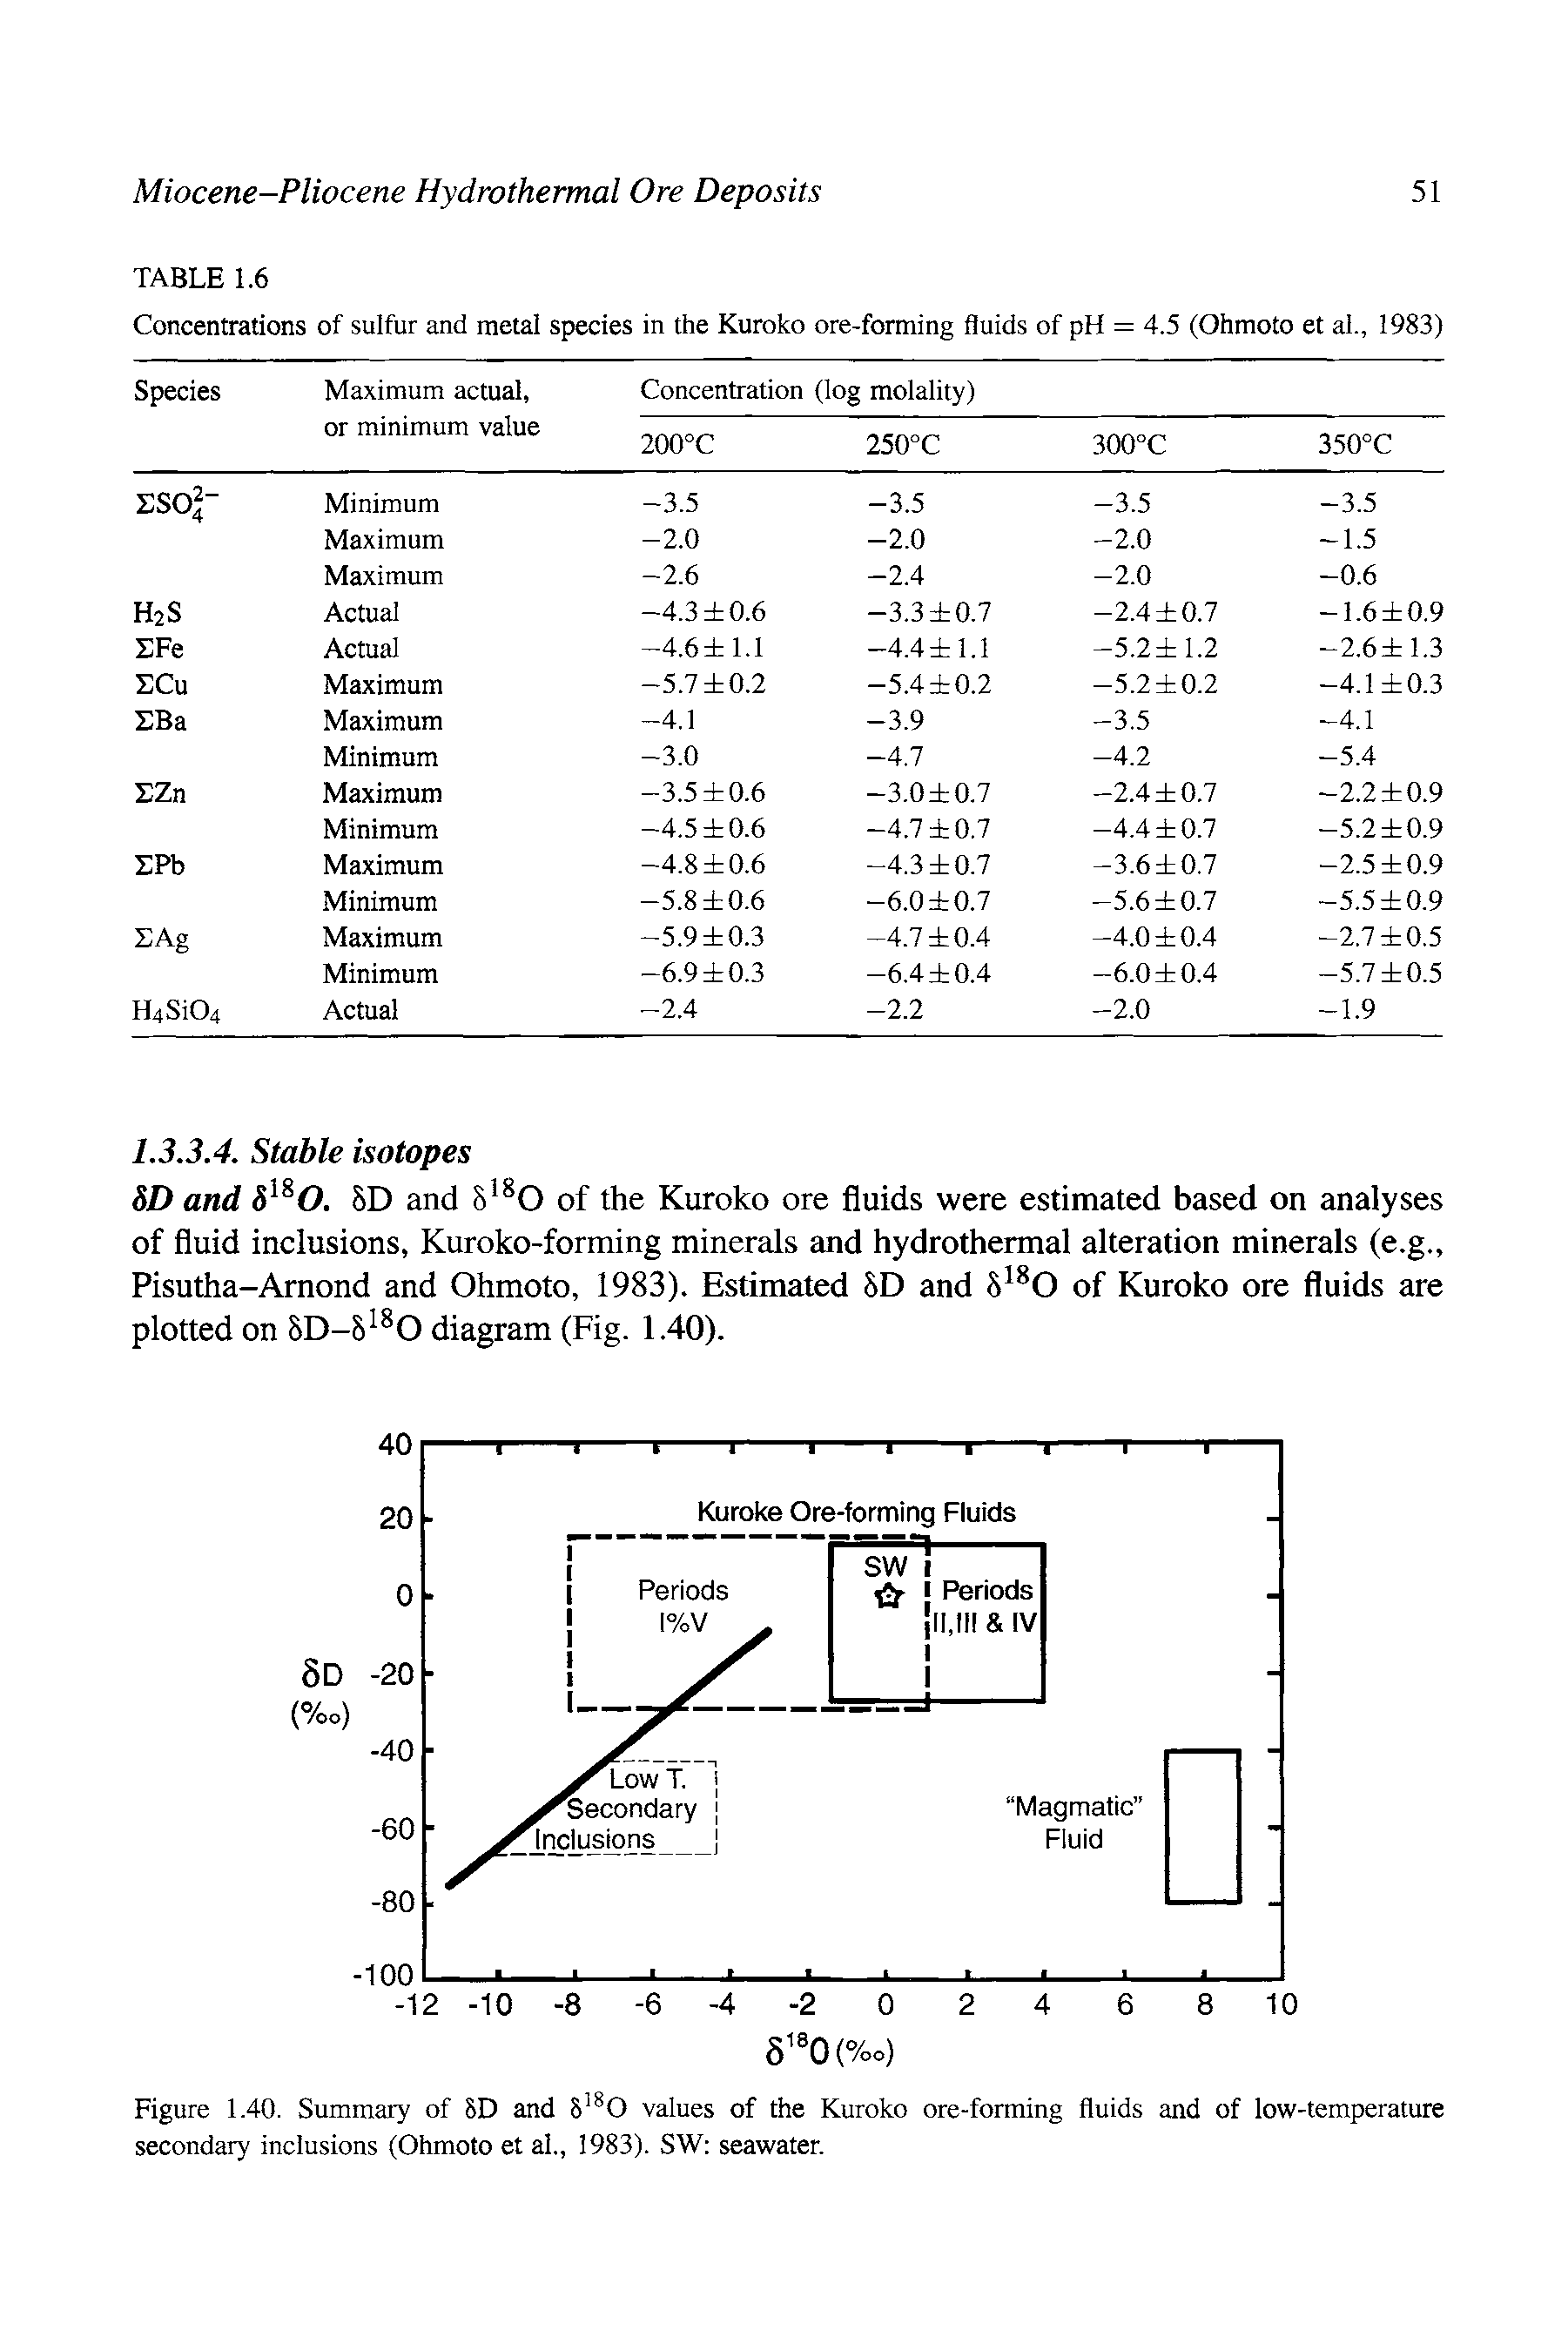 Figure 1.40. Summary of 5D and S O values of the Kuroko ore-forming fluids and of low-temperature secondary inclusions (Ohmoto et al., 1983). SW seawater.